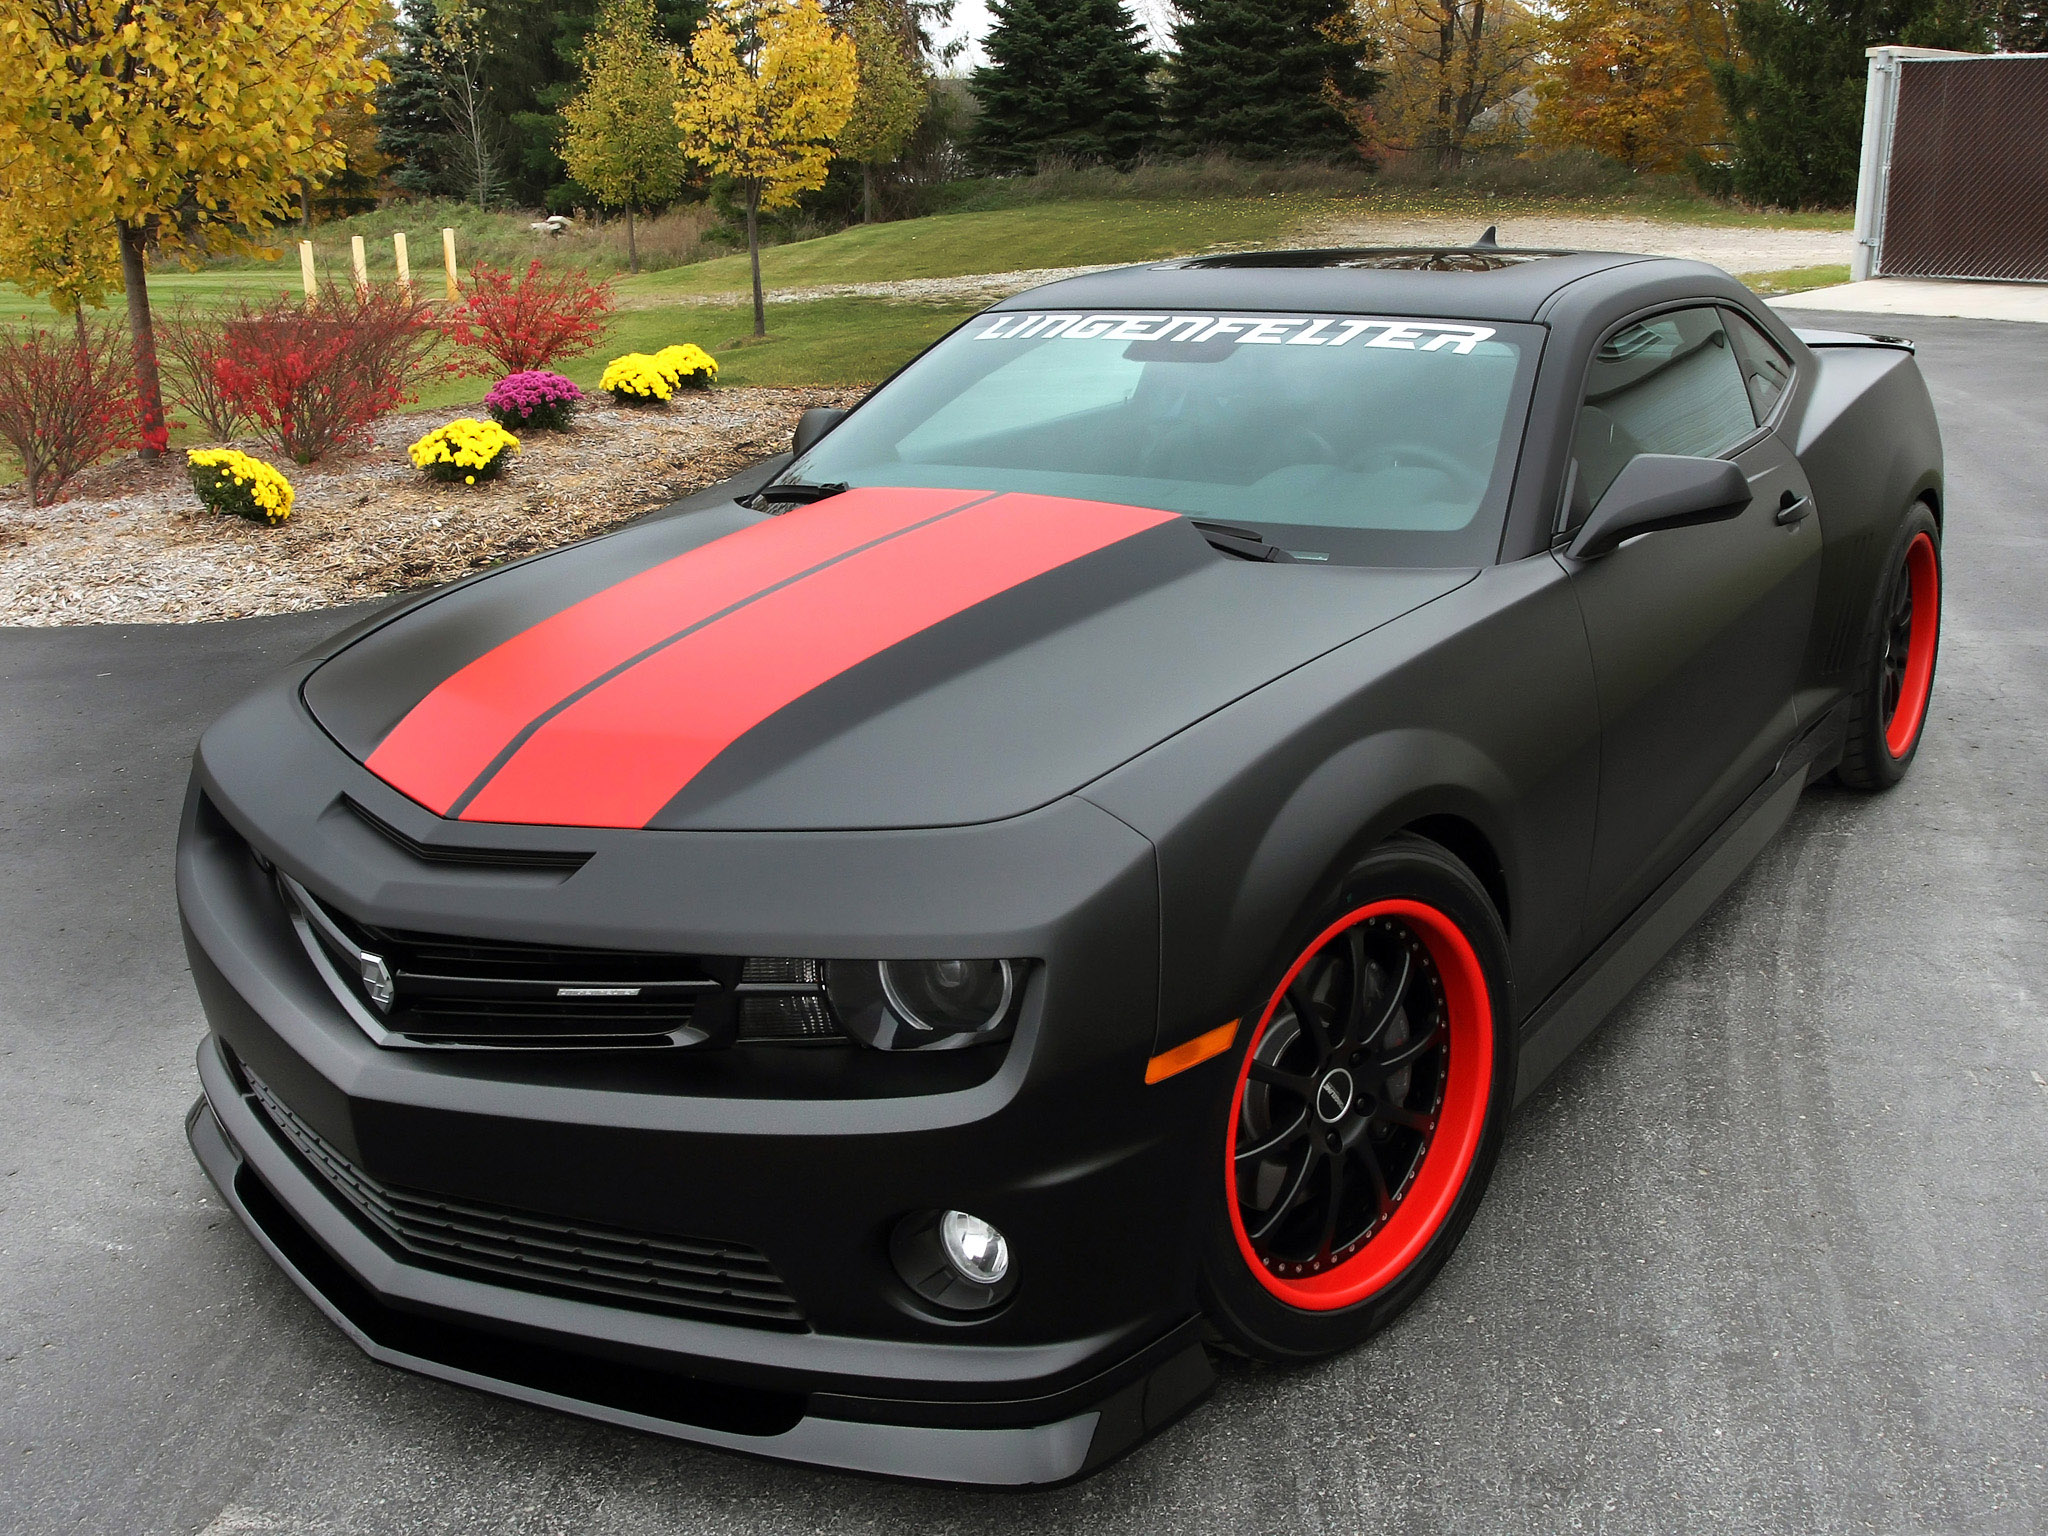 2010, Chevrolet, Camaro, S s, Supercharged, Muscle, Supercar, Supercars Wallpaper